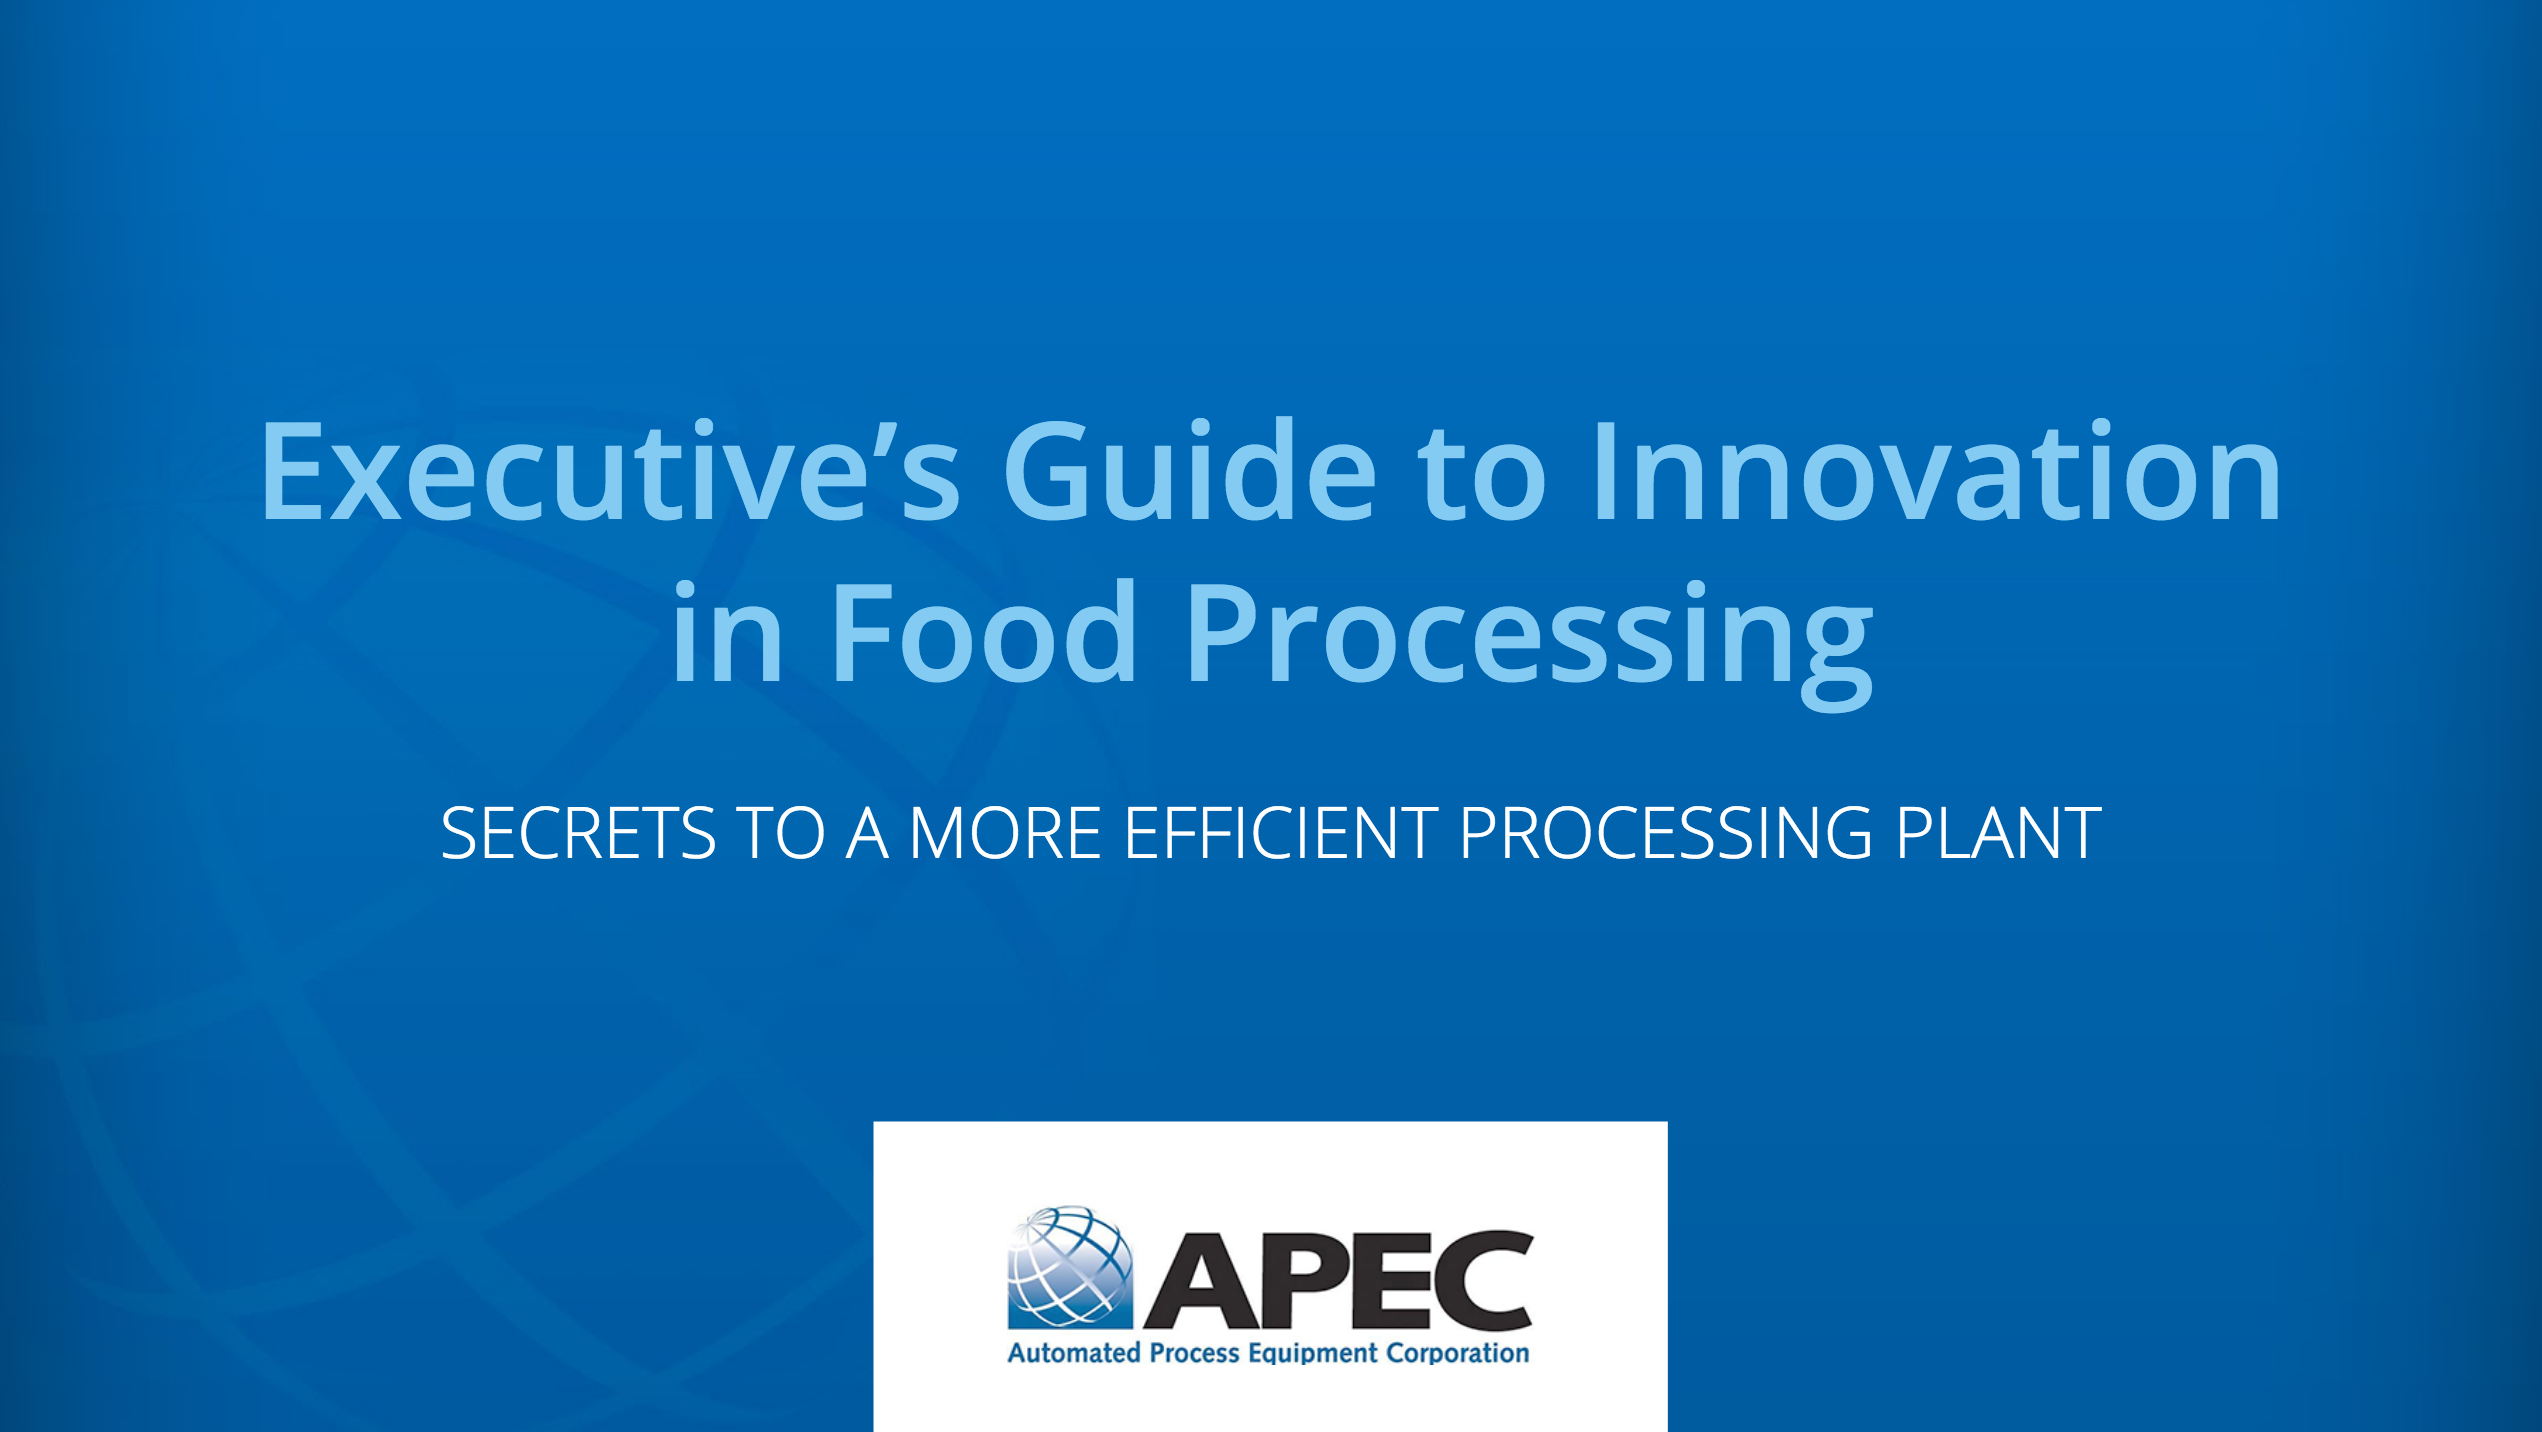 Executive’s Guide to Innovation in Food Processing